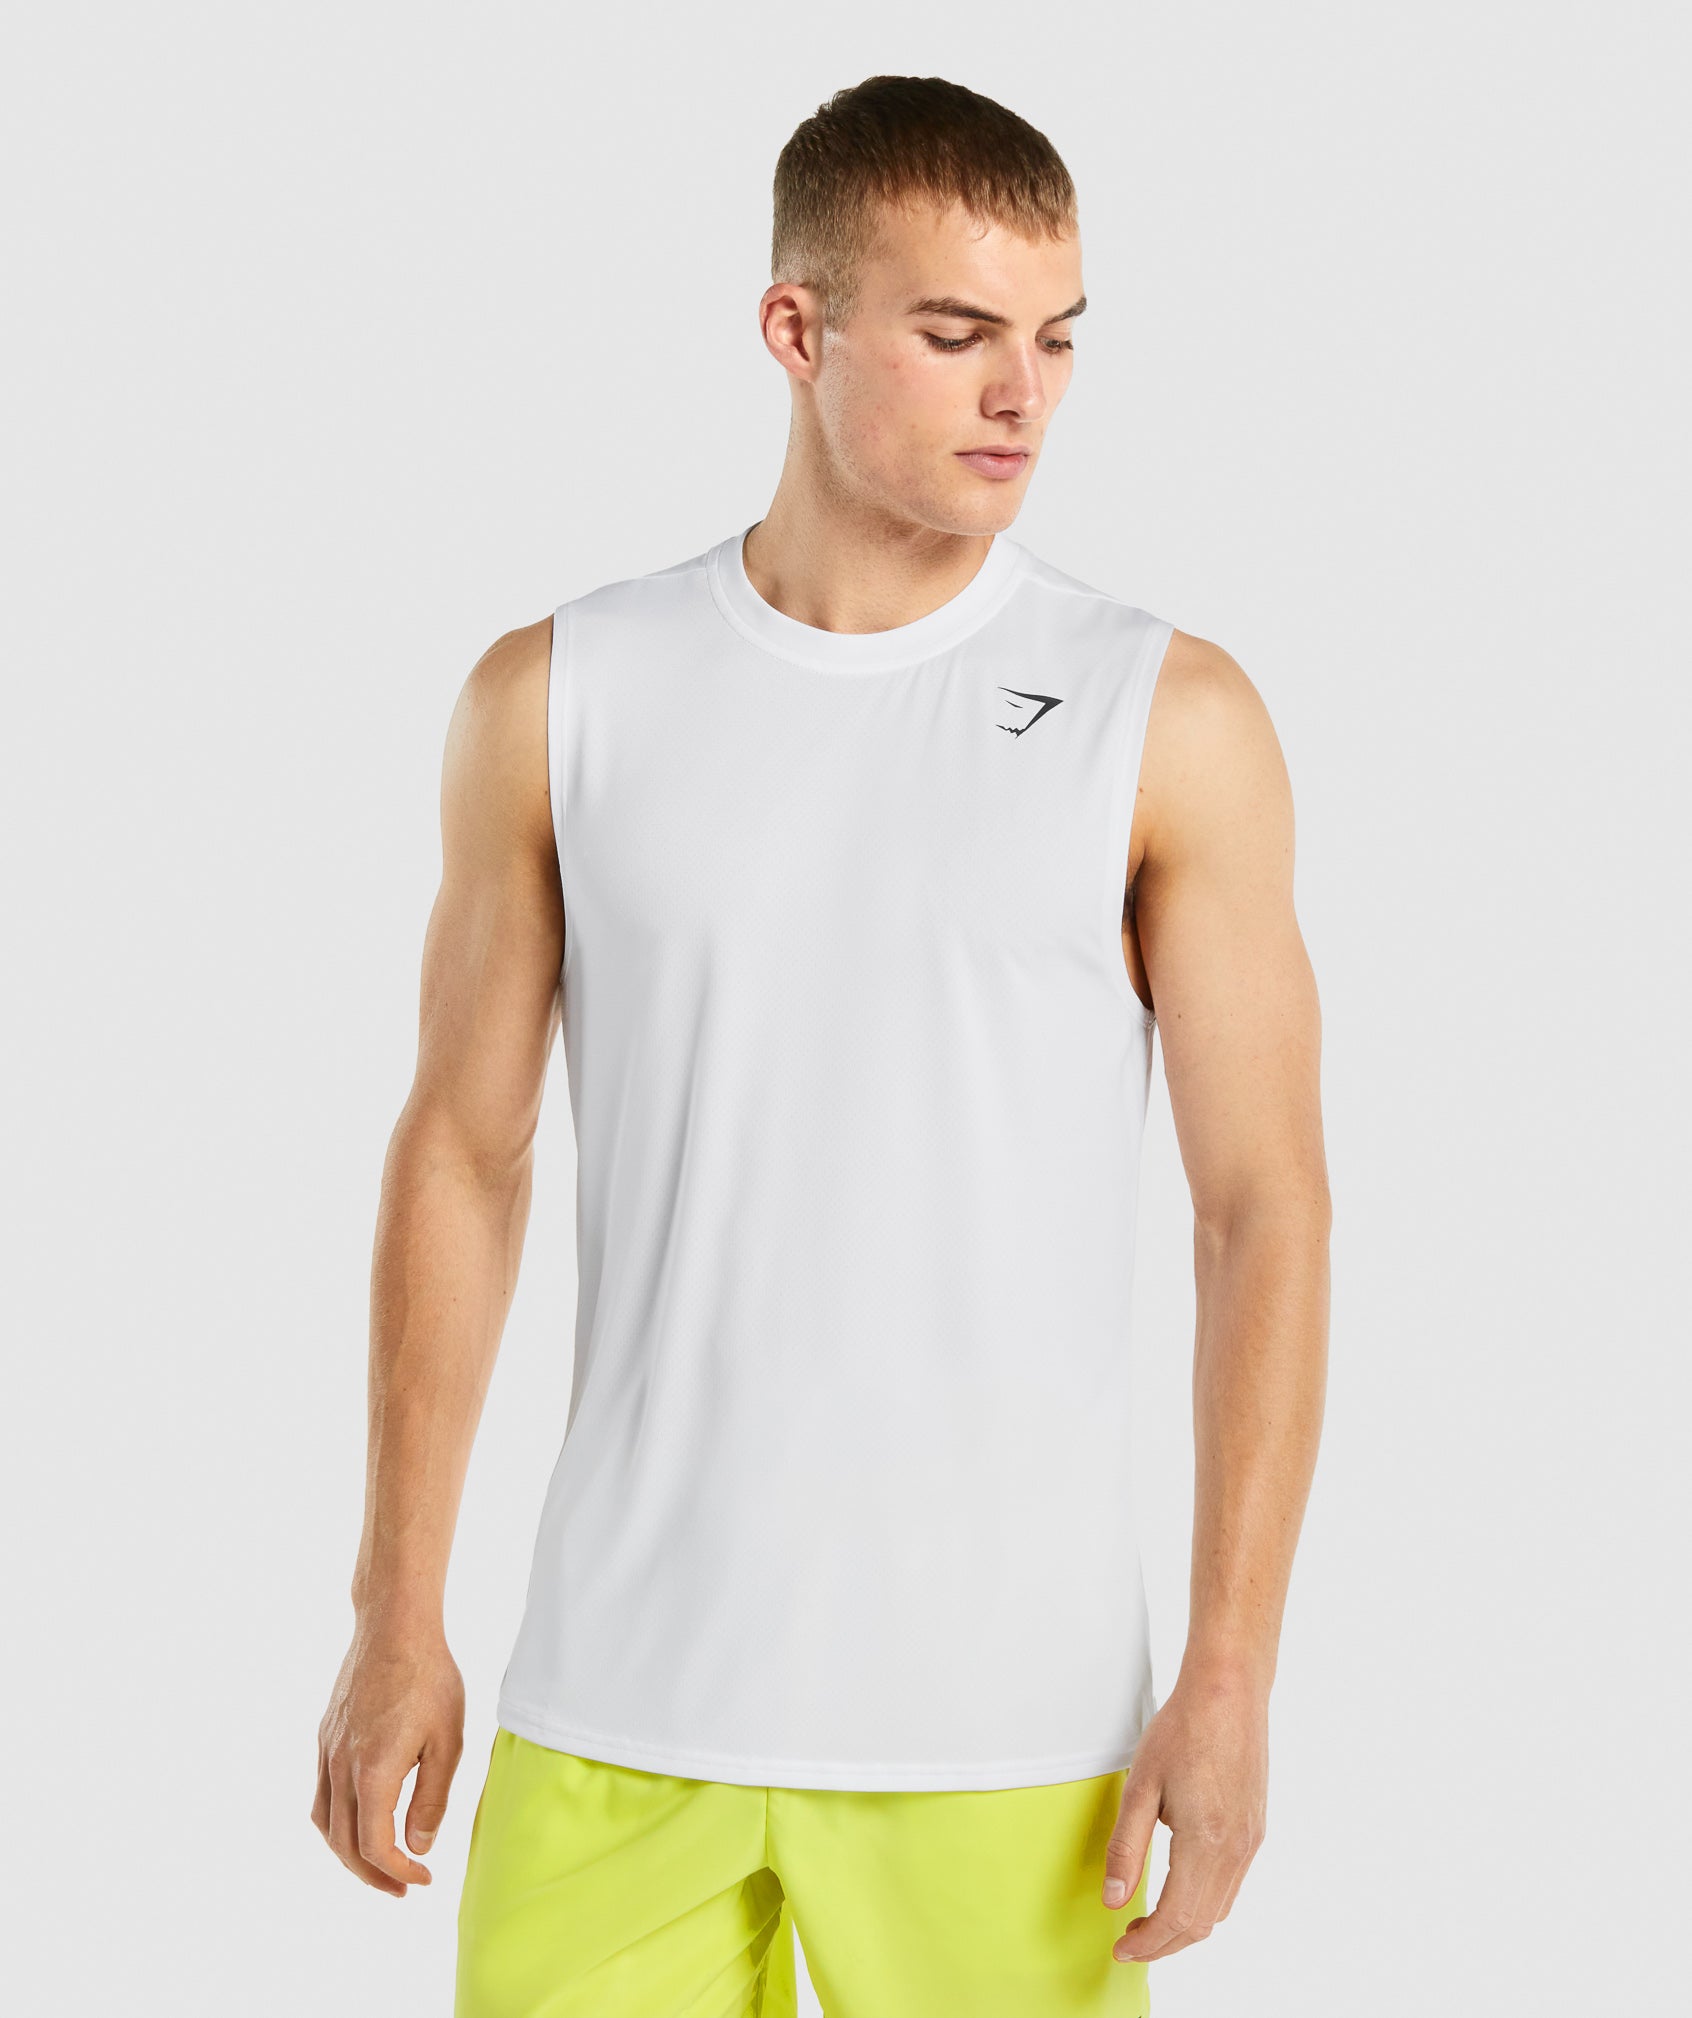 Arrival Sleeveless T-Shirt in White - view 1